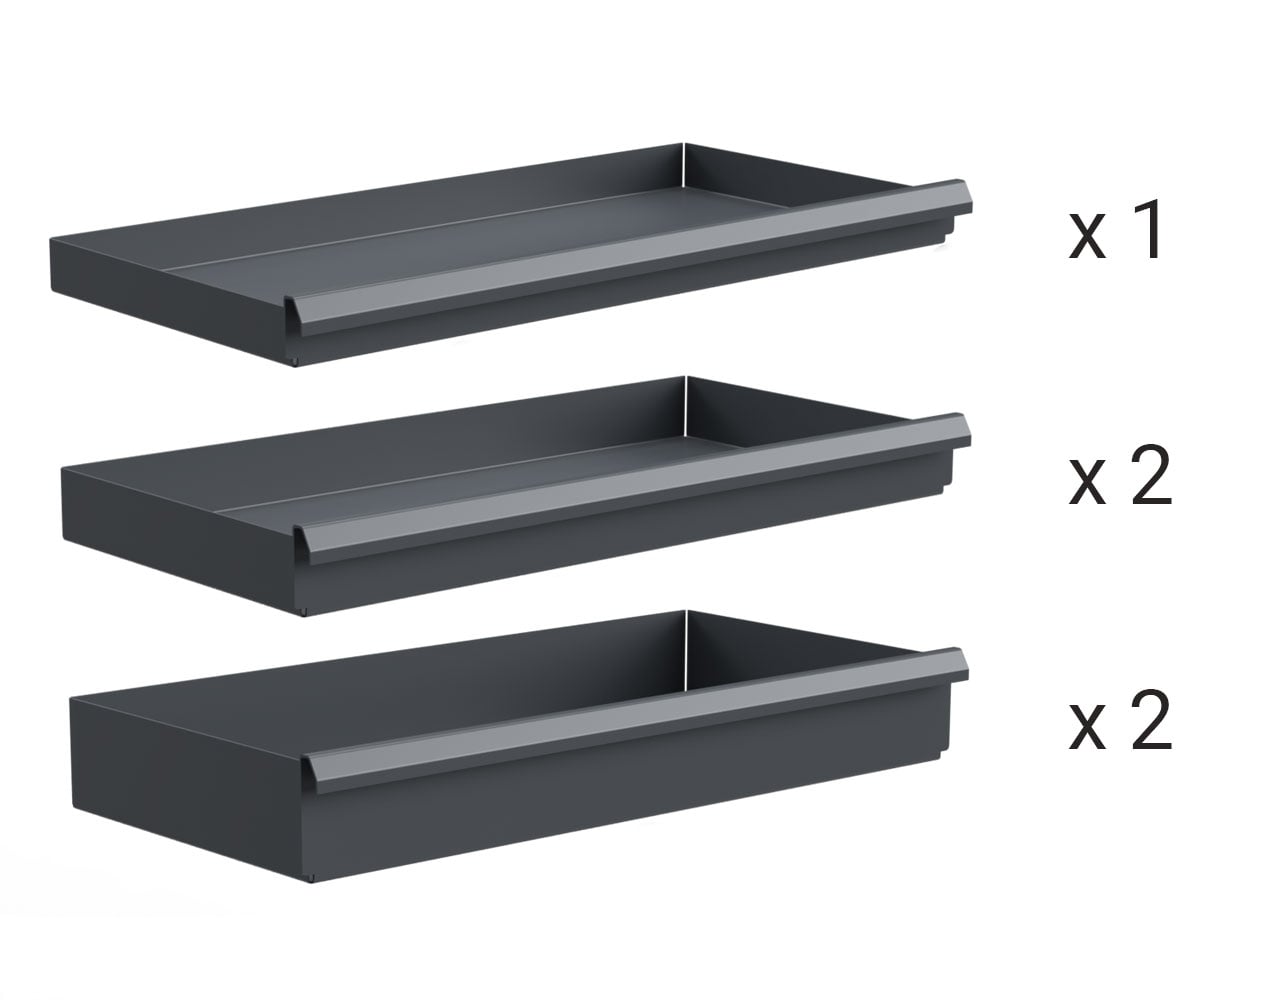 Extra Heavy Duty Drawer Kit with (1) 3 in. (2) 4 in. (2) 6 in. Drawers for 36 in. W x 24 in. D Cabinet